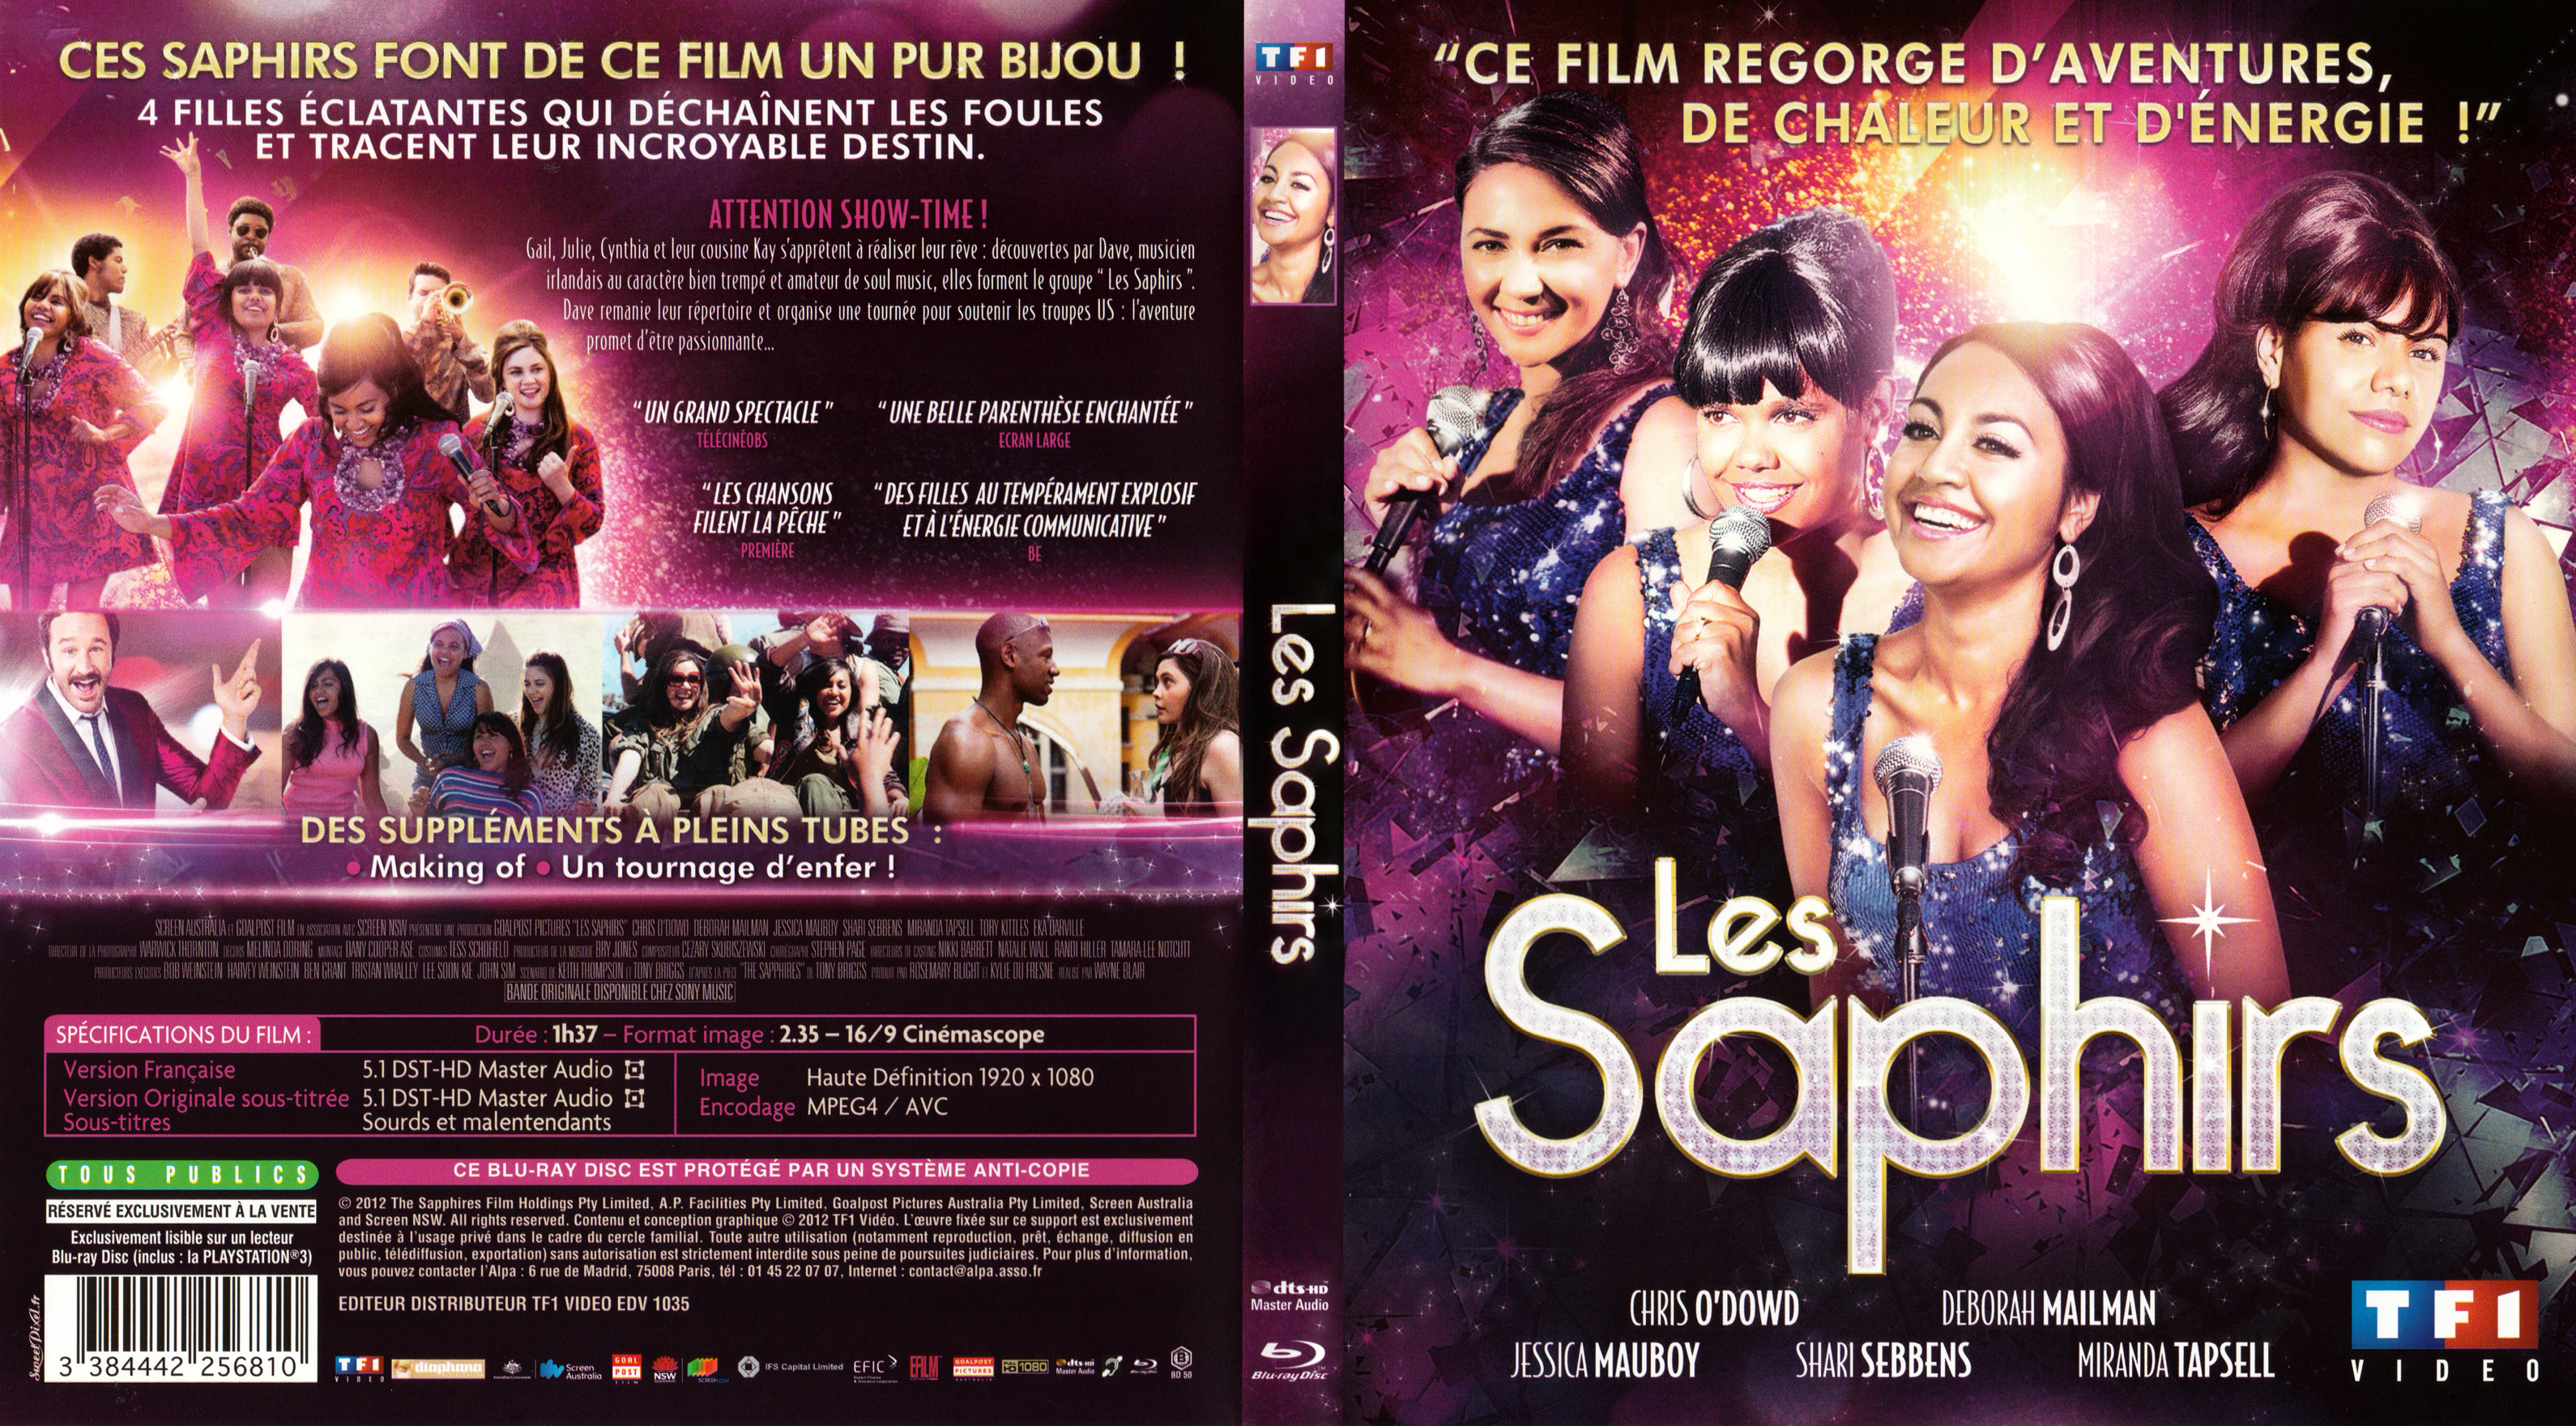 Jaquette DVD Les saphirs (BLU-RAY)